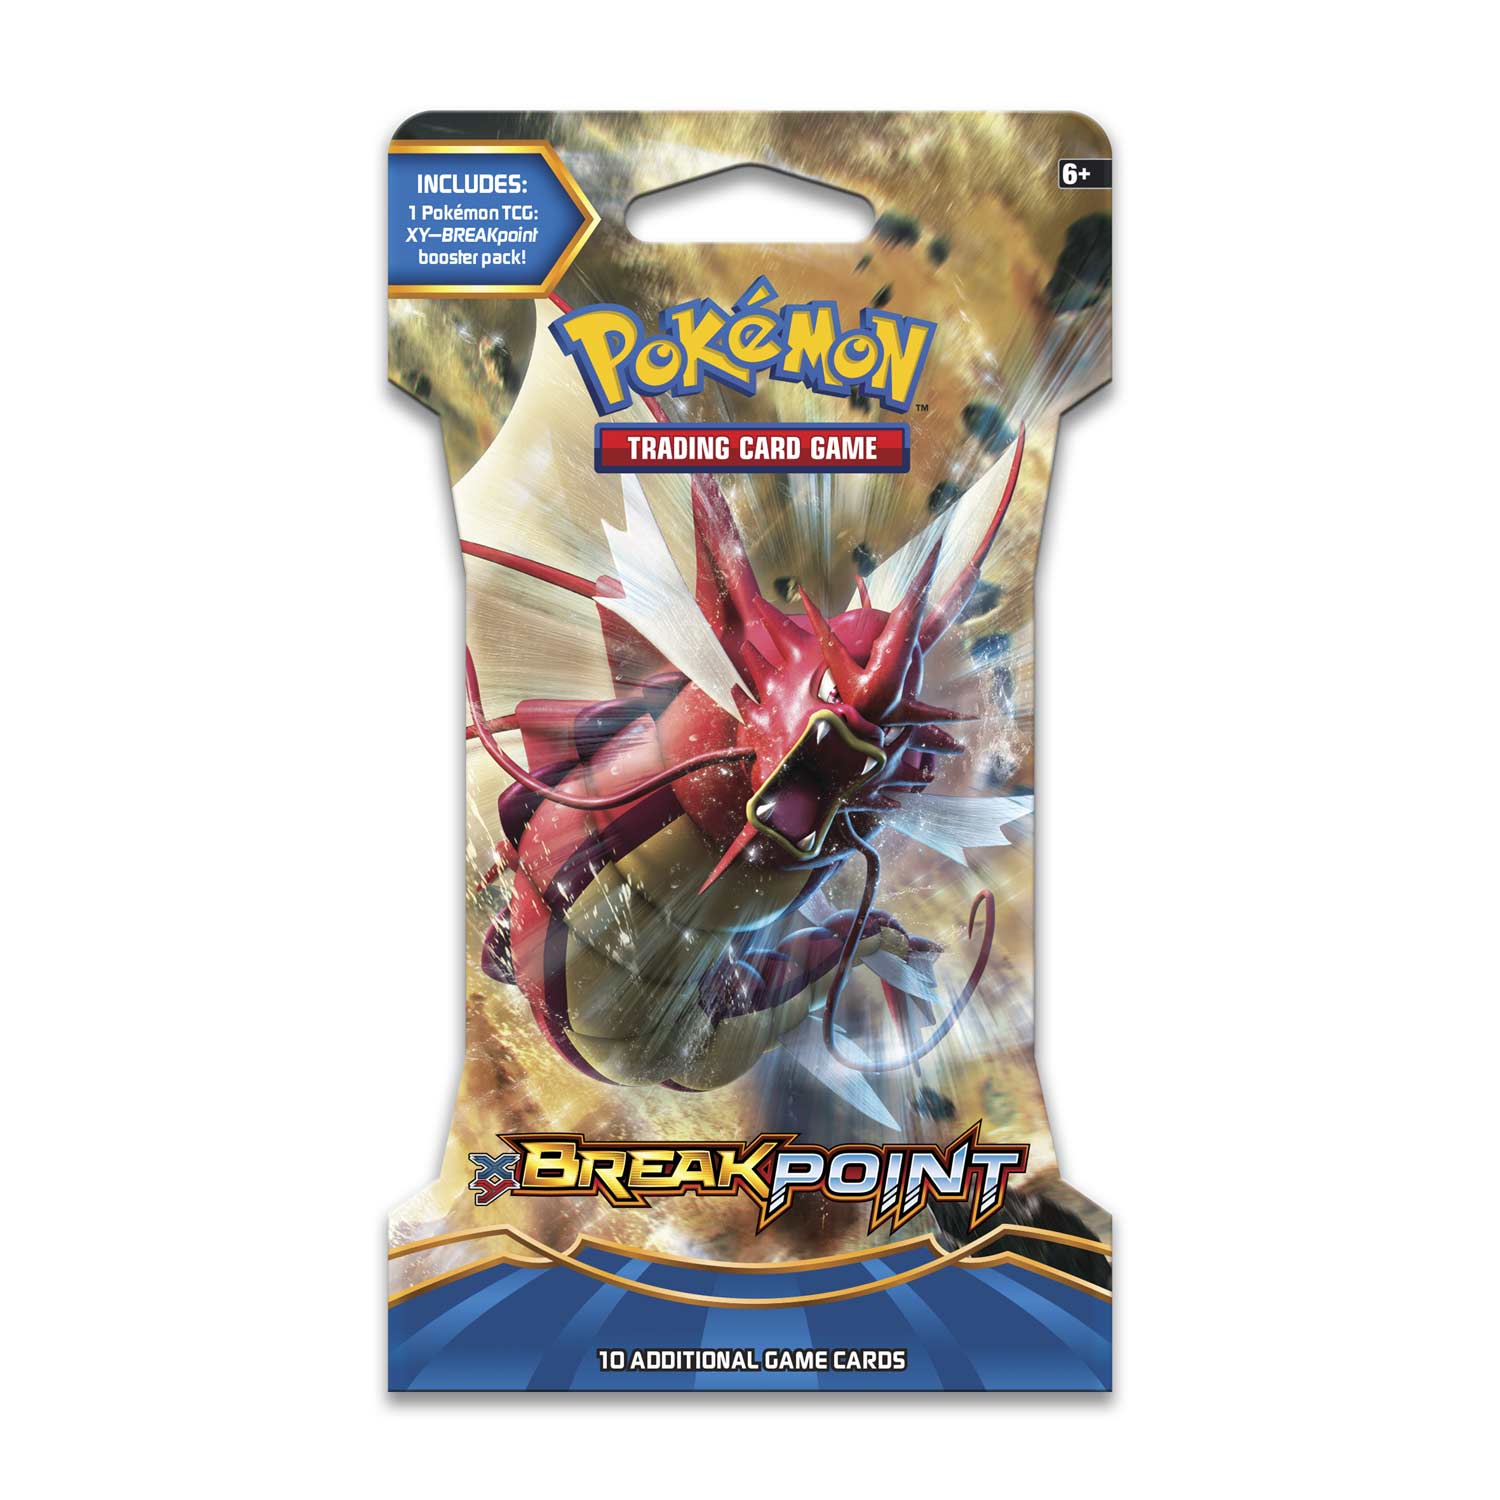 Pokemon TCG XY9 BREAKpoint Sleeved Booster 36 Packs same as booster box new 